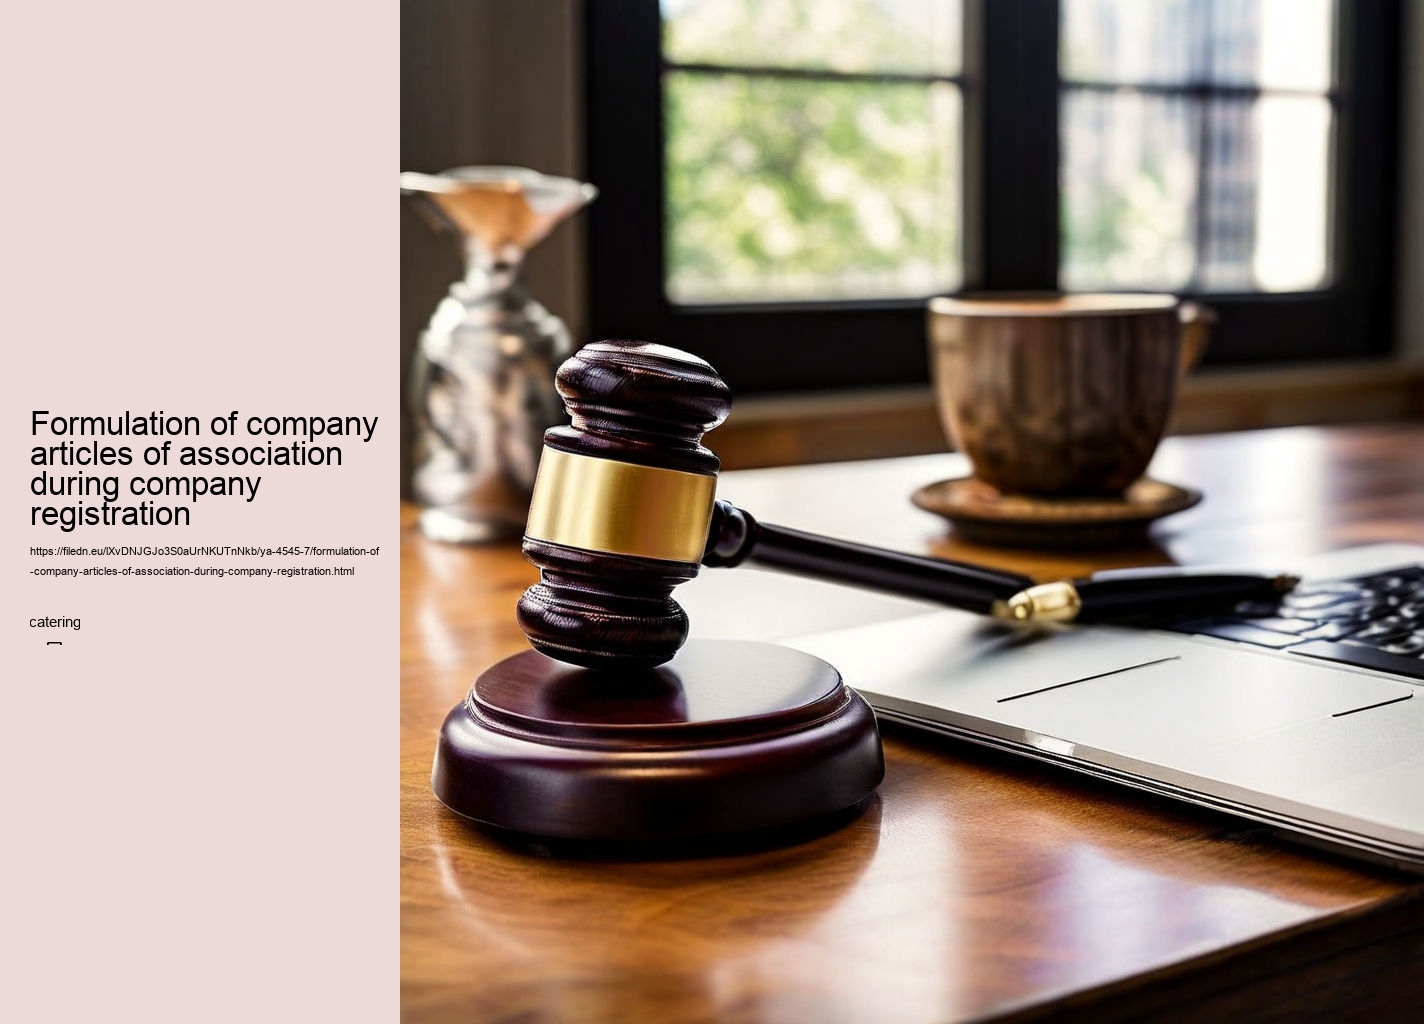 Formulation of company articles of association during company registration